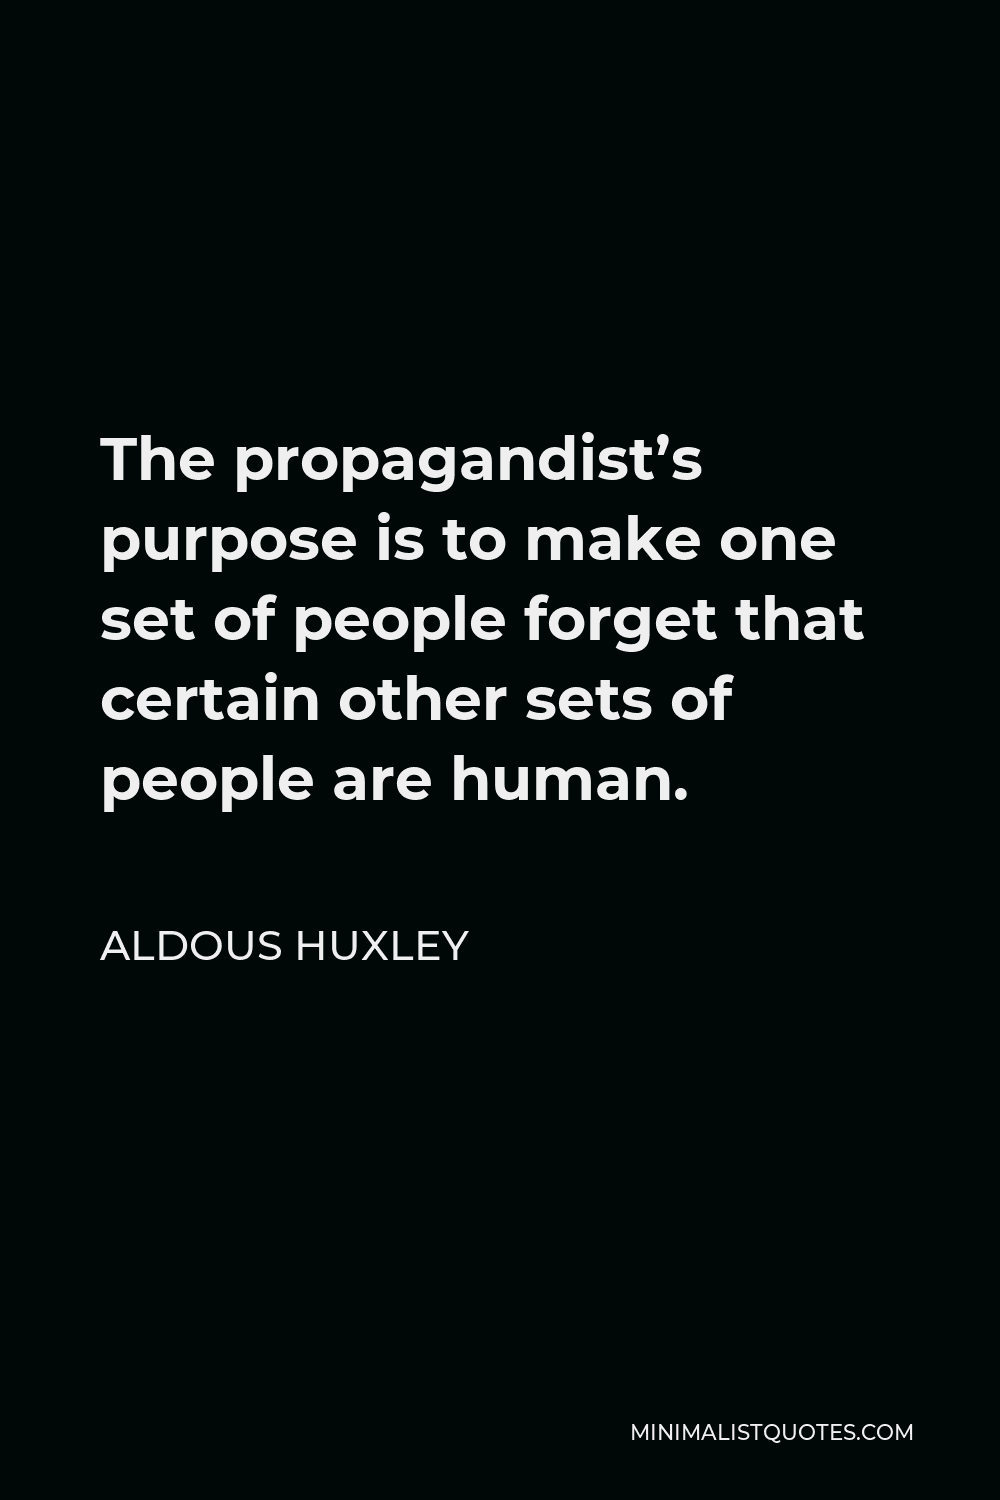 Aldous Huxley Quote - The propagandist’s purpose is to make one set of people forget that certain other sets of people are human.